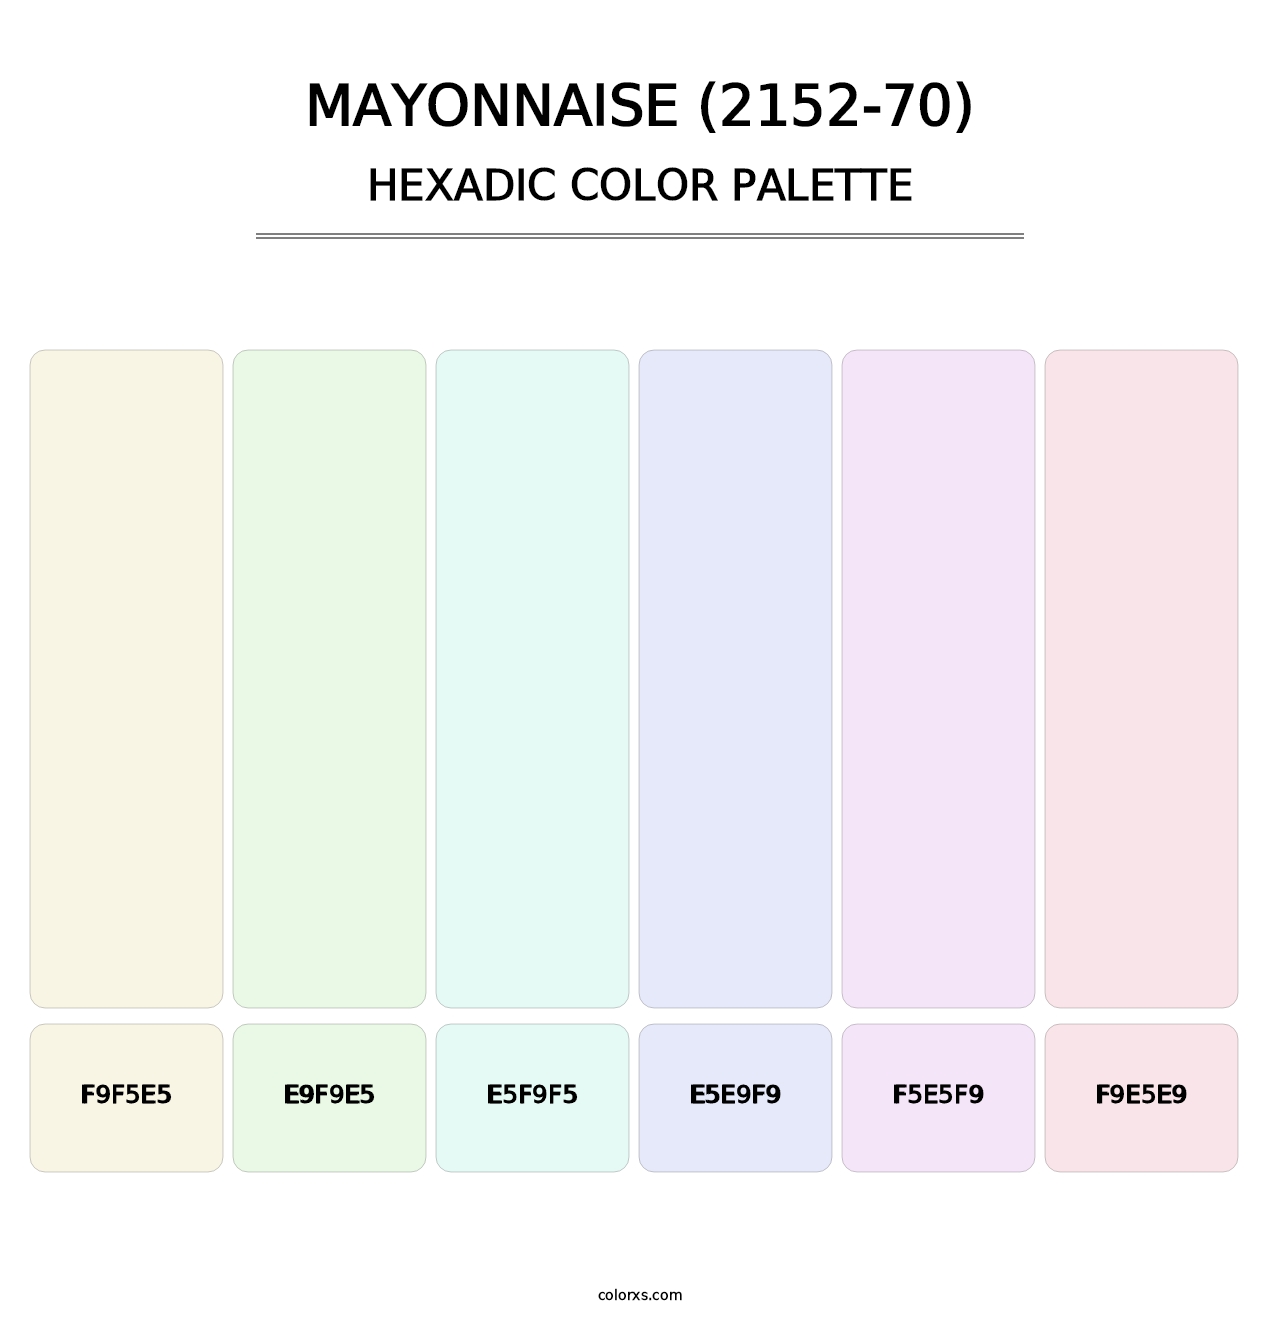 Mayonnaise (2152-70) - Hexadic Color Palette